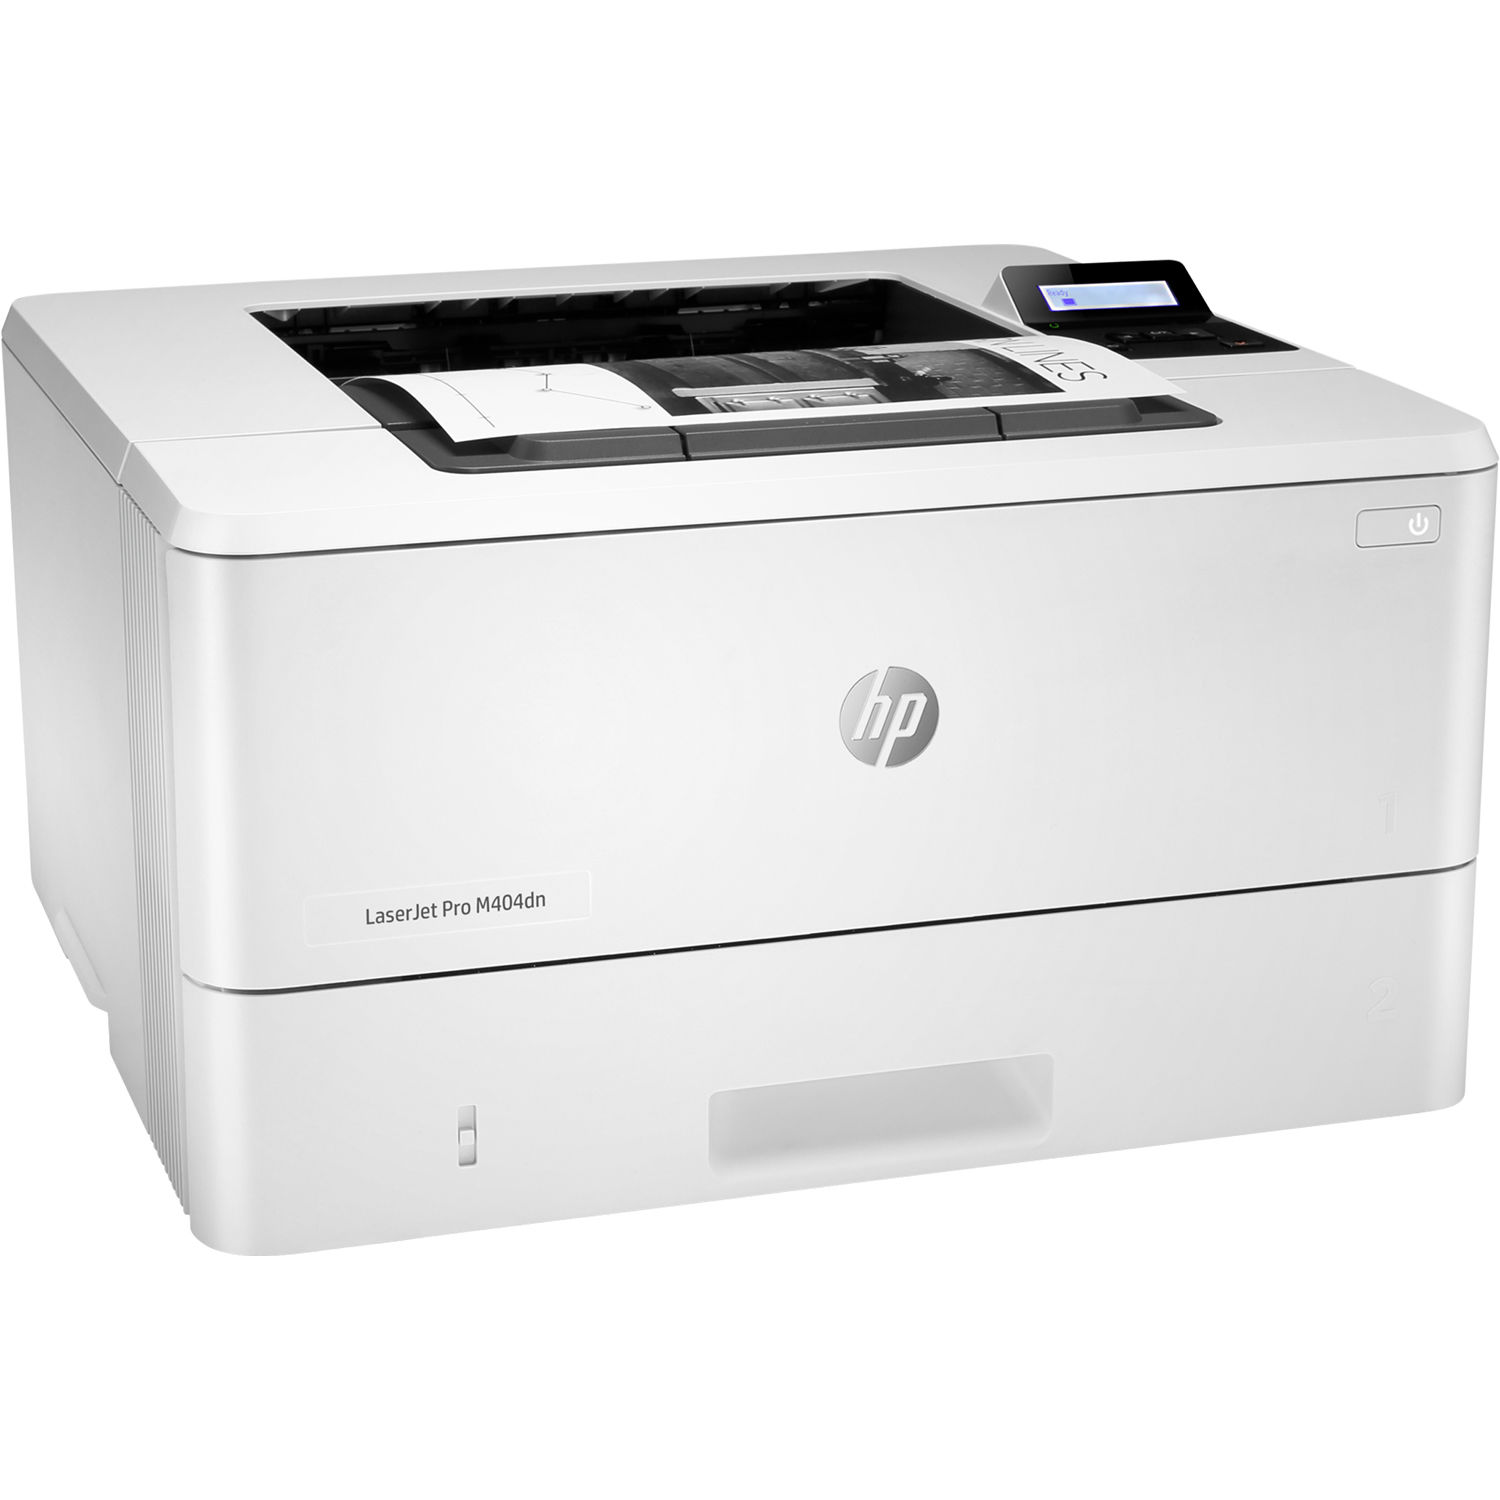 HP LaserJet Pro M404dn Monochrome Laser Printer with Built-In Ethernet & Double-Sided Printing